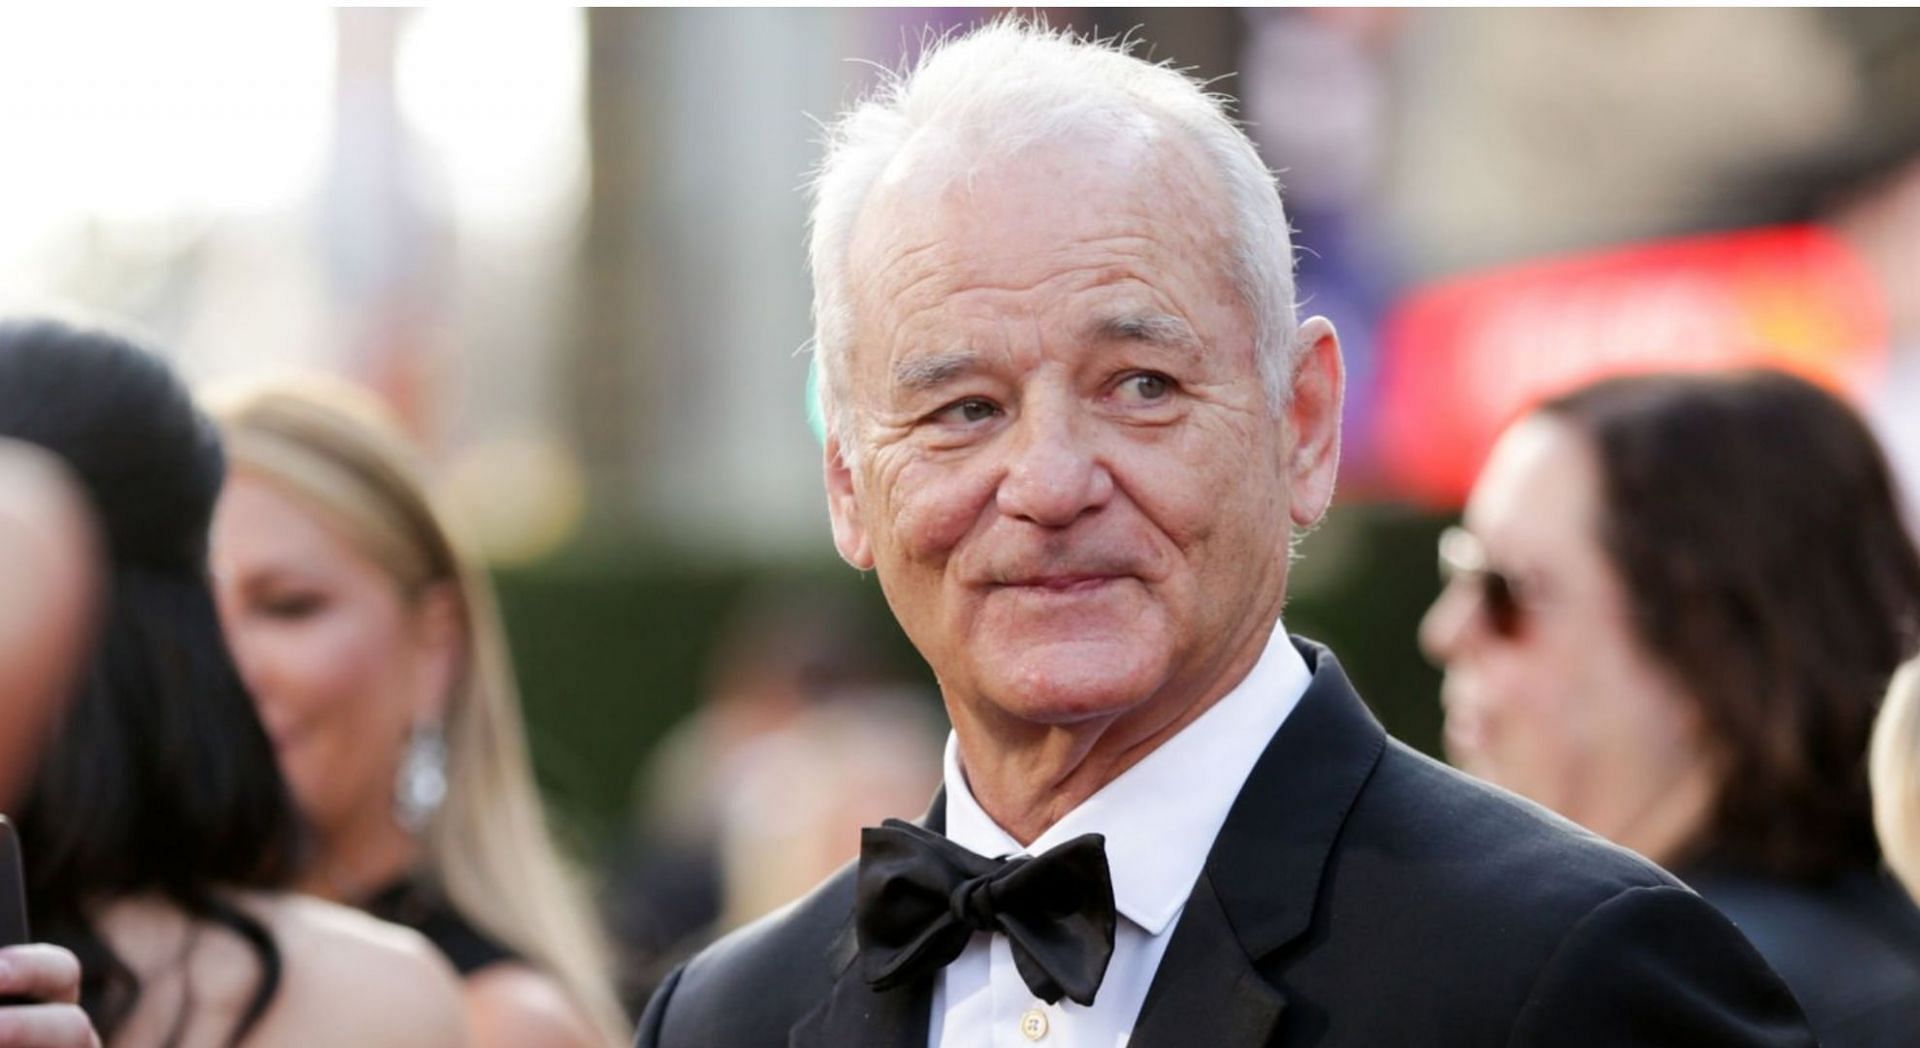 Multiple celebrities have accused Bill Murray of inappropriate workplace behavior (Image via Getty Images)